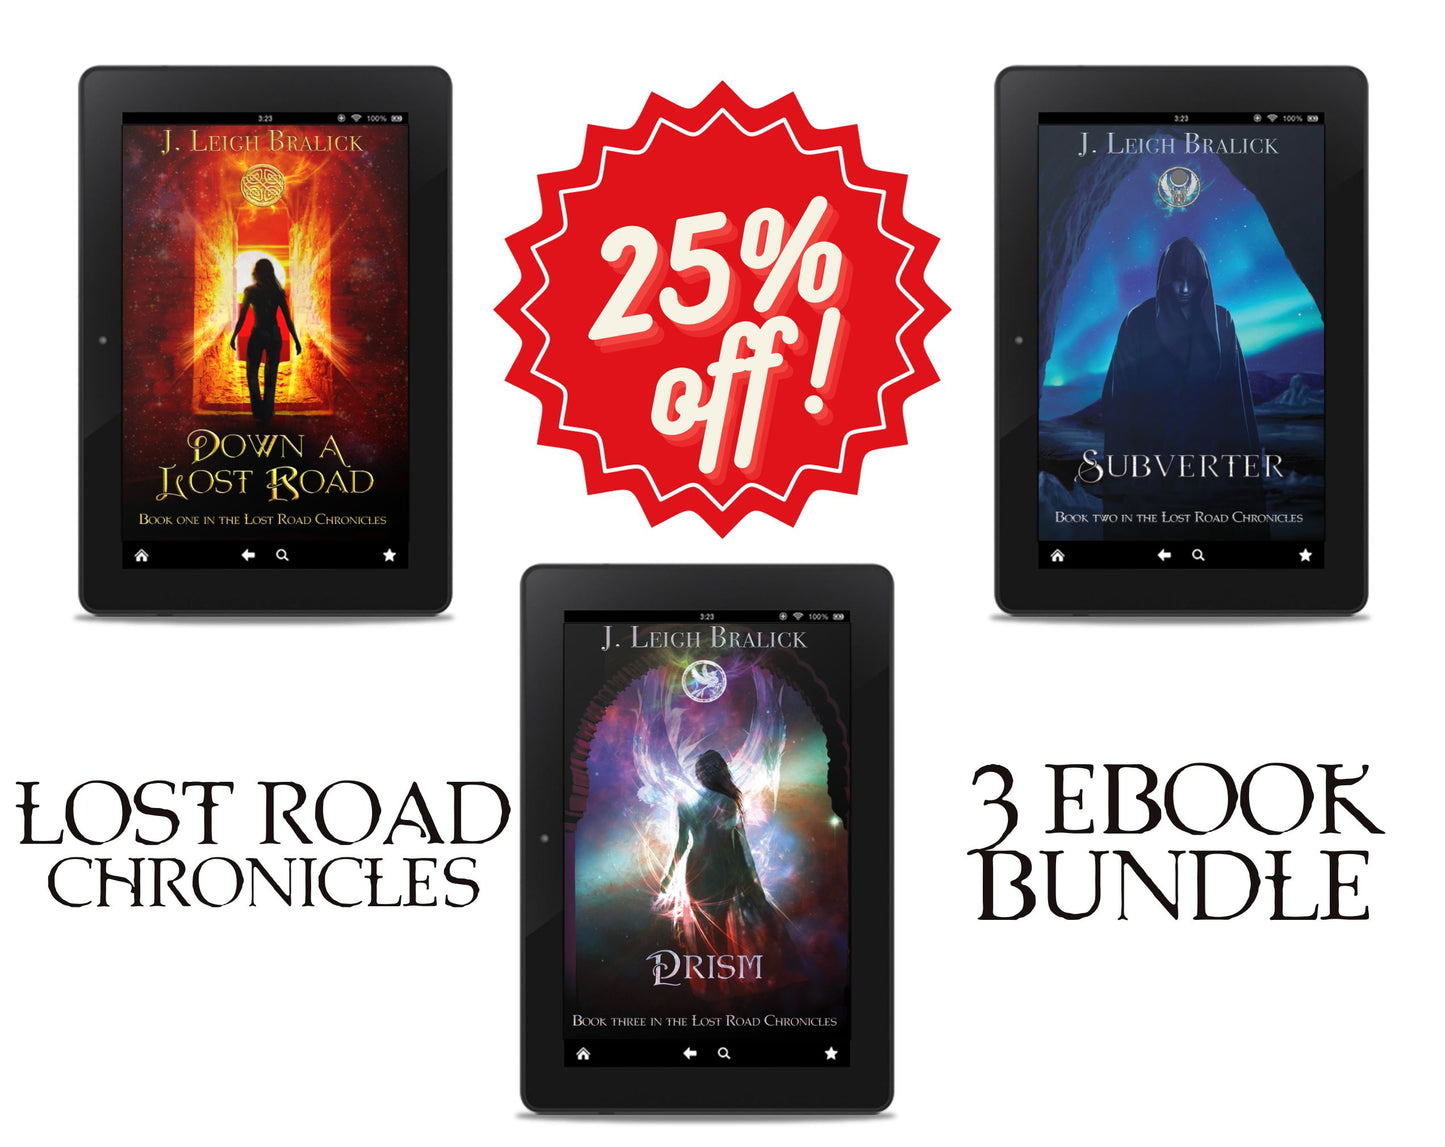 The Lost Road Chronicles Ebook Bundle